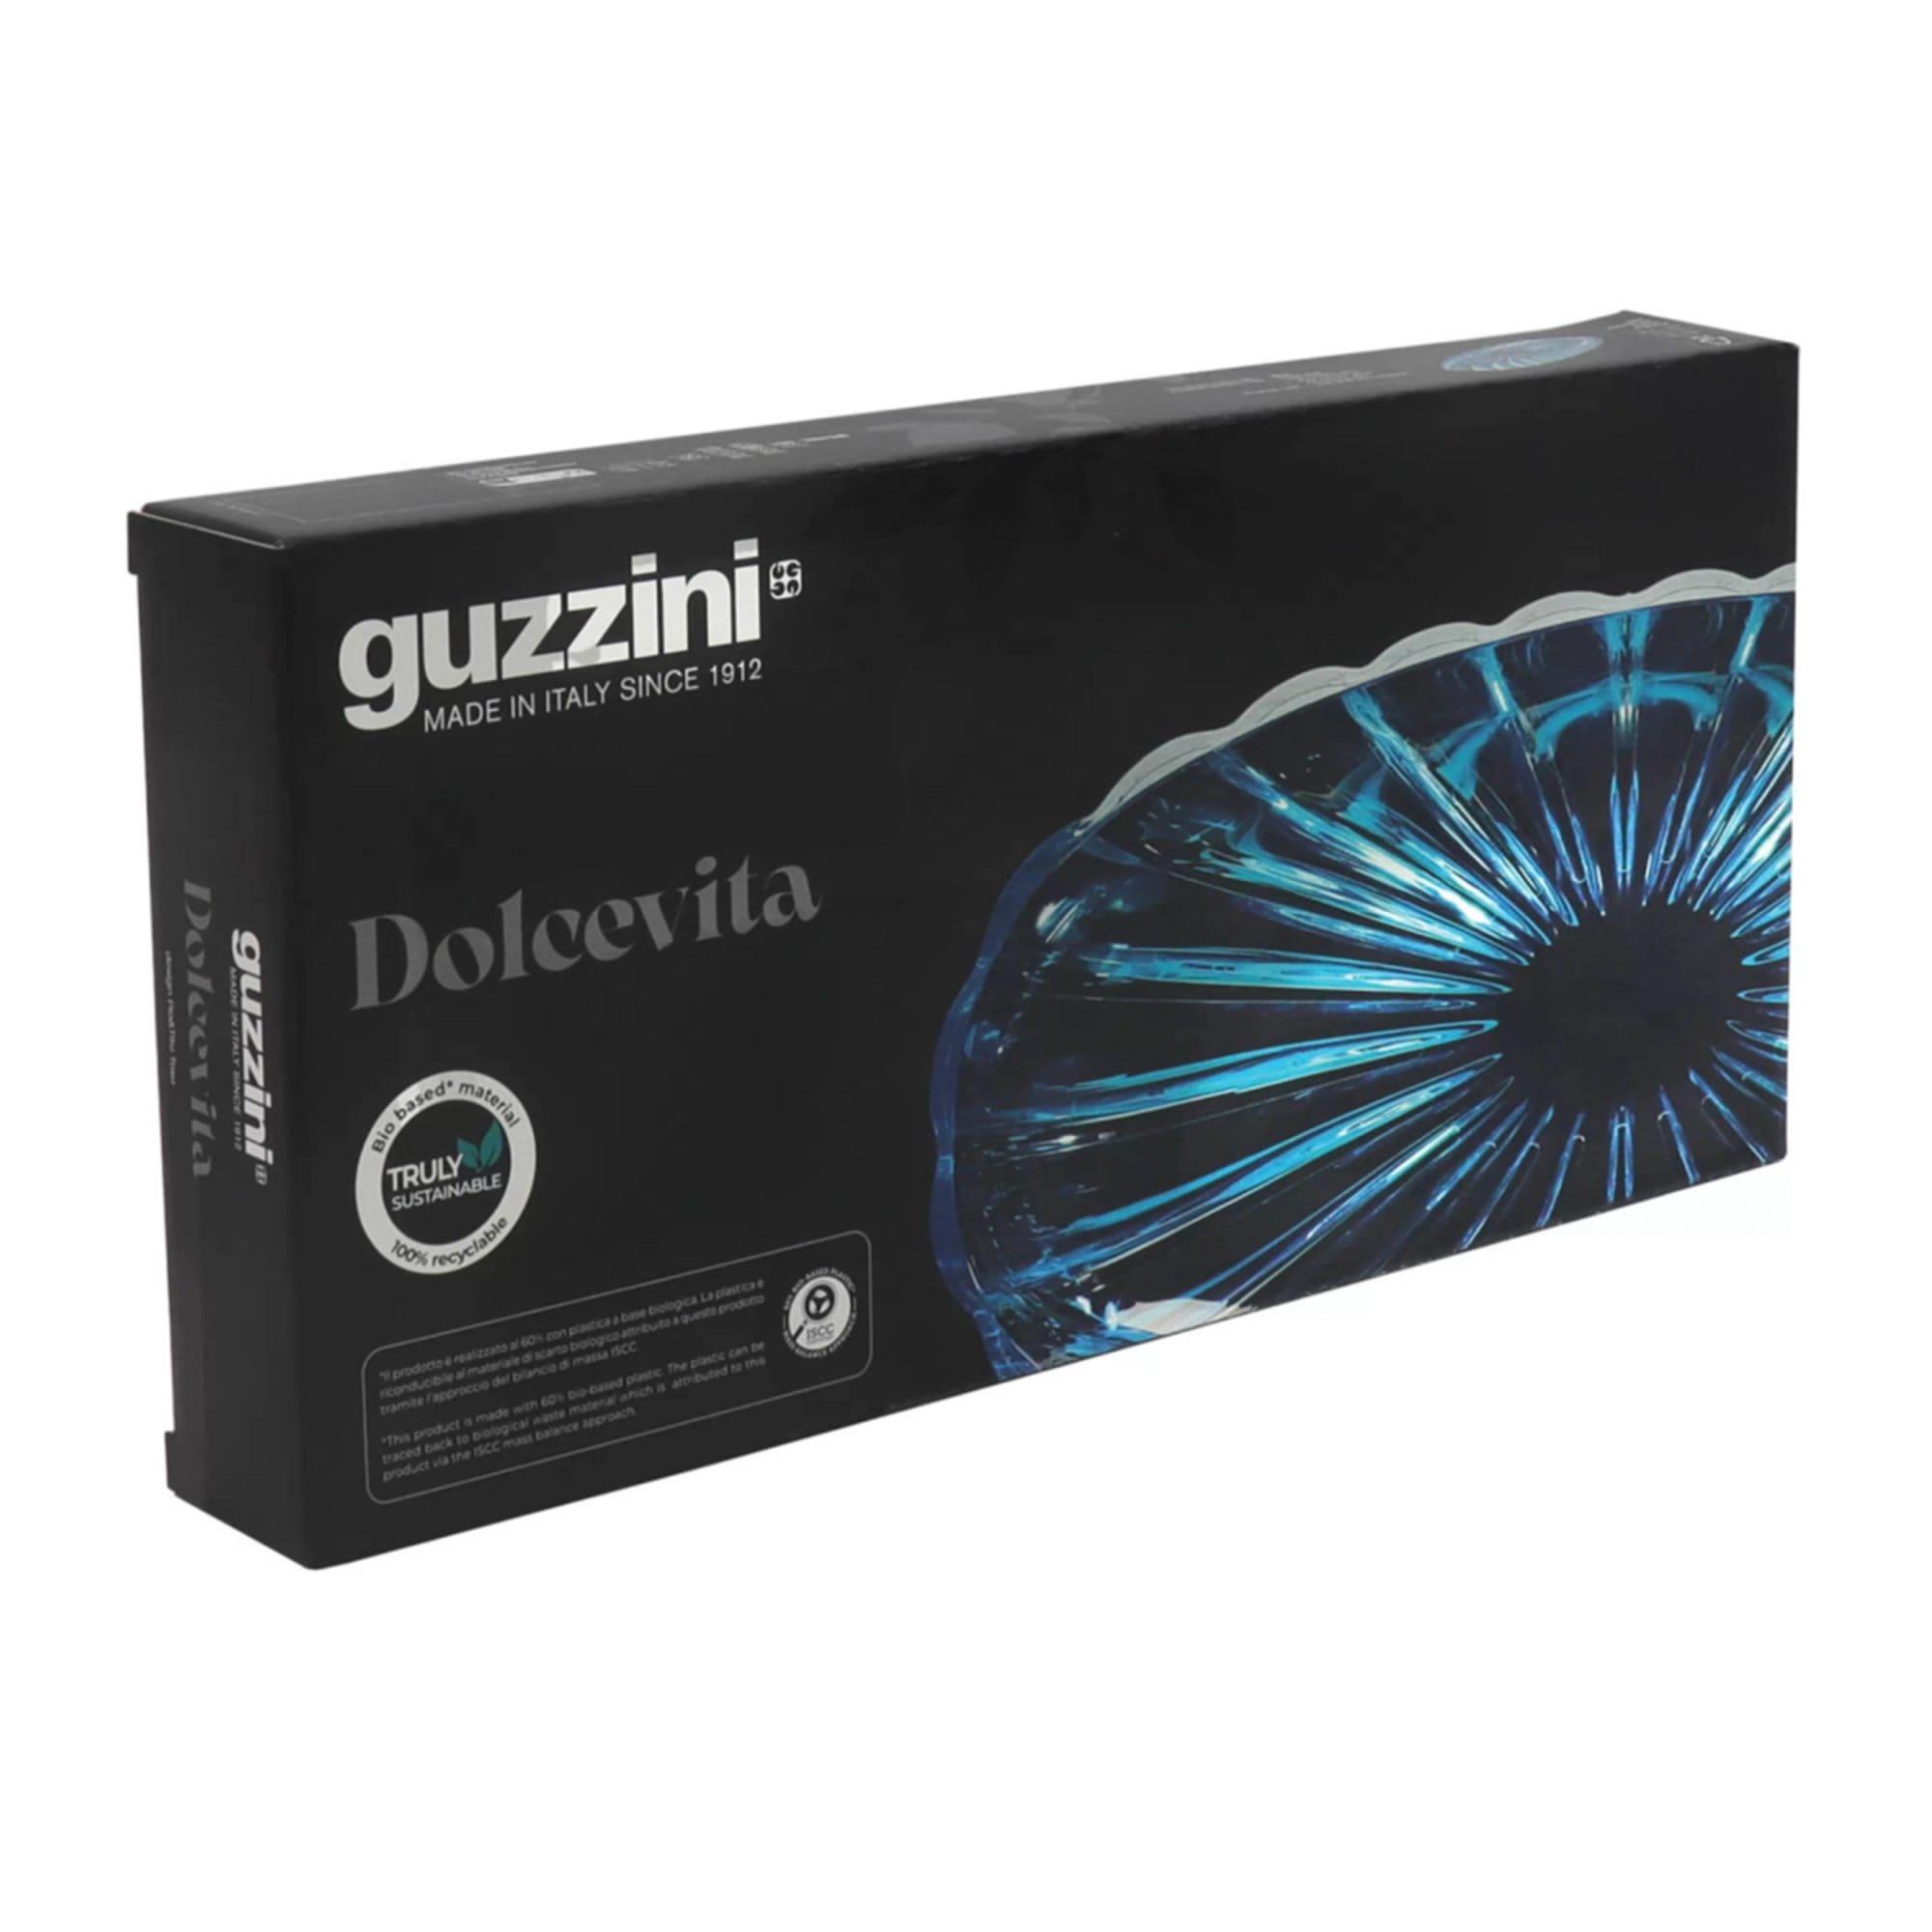 Guzzini Dolcevita Oval Serving Tray 38x19cm Turquoise Image 4